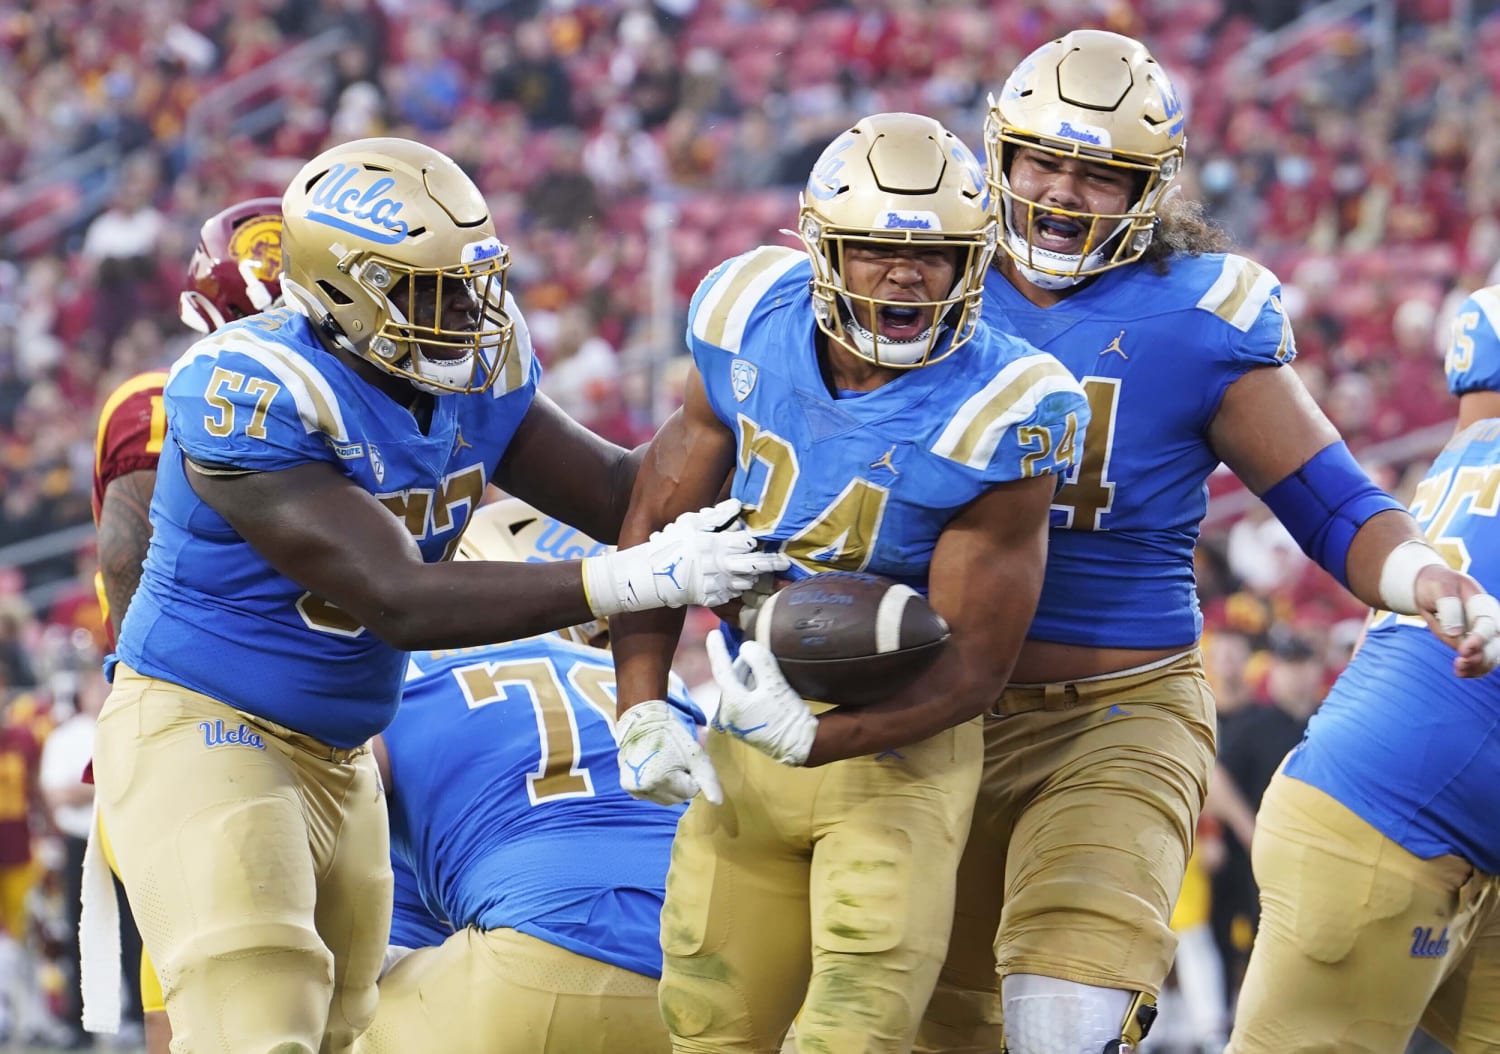 Holiday Bowl in San Diego is off after Covid forces UCLA to drop out hours before kickoff